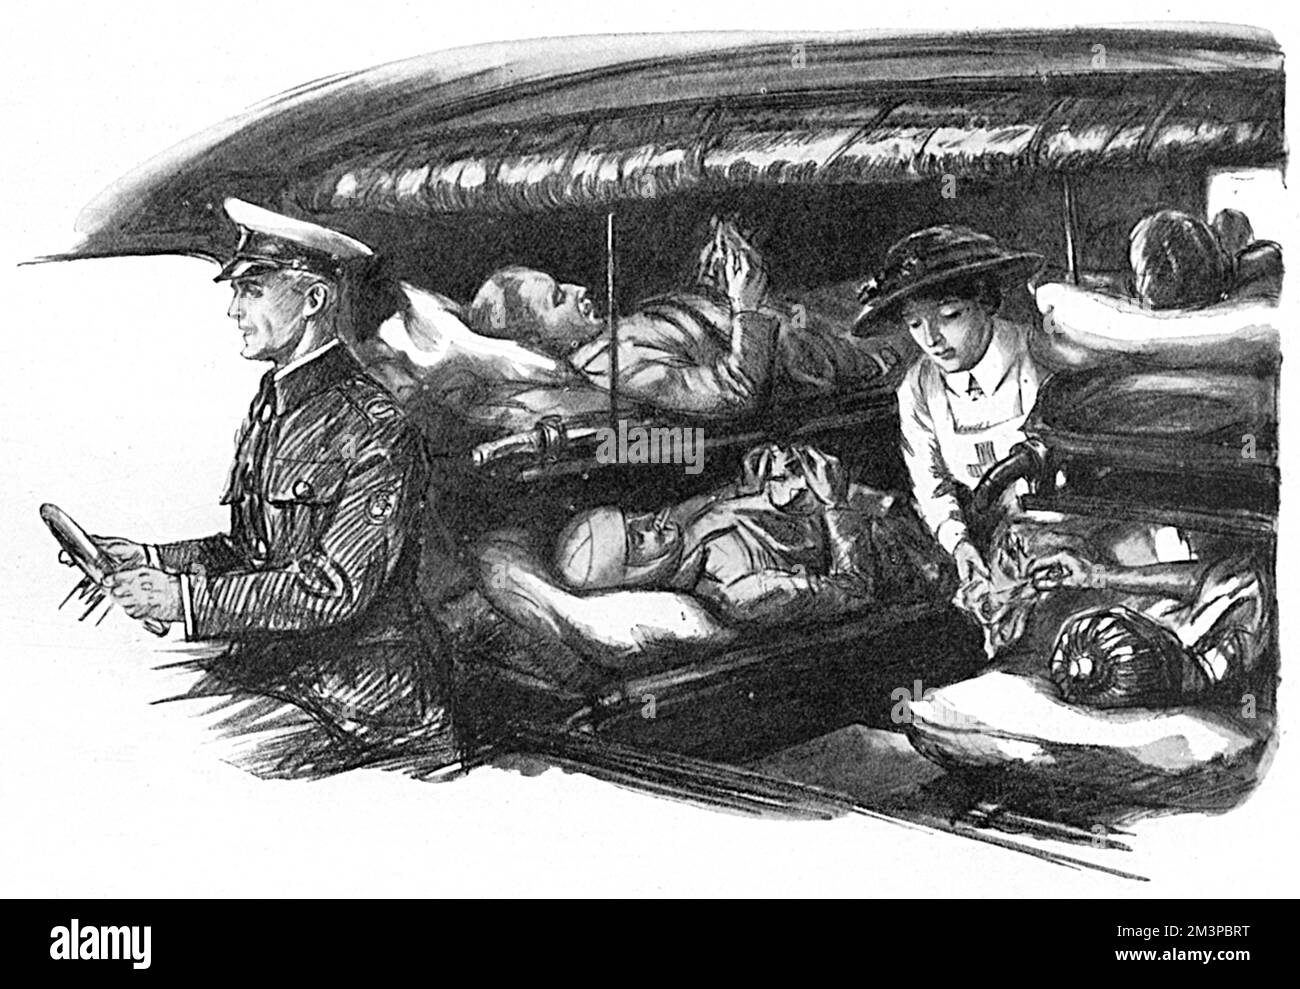 Wounded soldiers on stretchers (cot cases), having arrived in London via a hospital train are pictured inside an ambulance being offered bananas and a packet of cigarettes by an attending nurse.  During the First World War, ambulance trains arrived daily at the termini of the South Coast railways and the occupants were distributed to the numerous military hospitals around London.  As well as meeting trains at Charing Cross, Waterloo, Clapham Junction and elsewhere as required, it undertook removal cases from one hospital to another and to convalescent homes in the country.       Date: 1916 Stock Photo